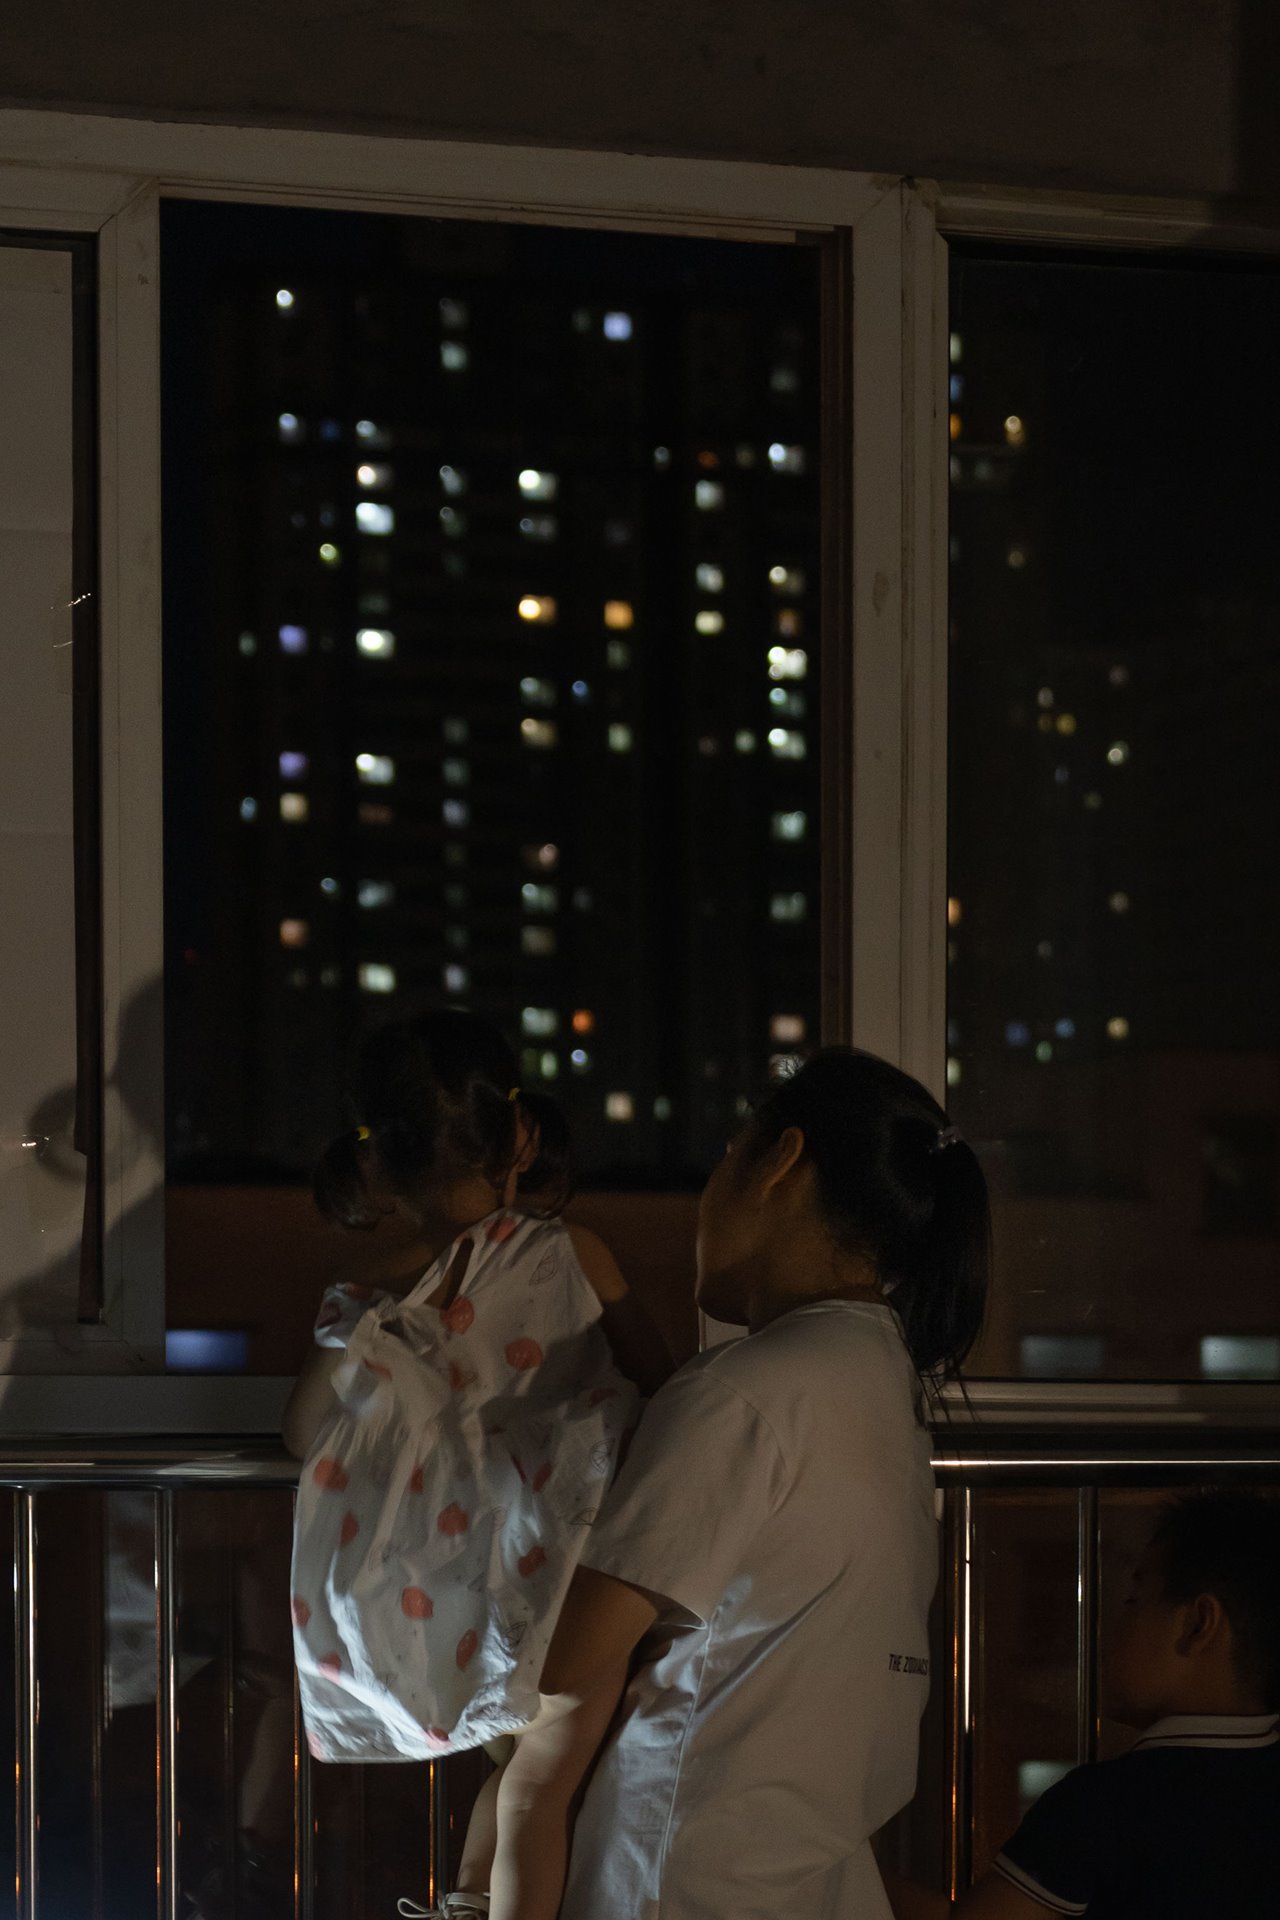 A mother and child gaze out at city lights in Xi&rsquo;an, China. In contrast, their own home is lit from below with a solar powered lamp due to lack of electricity in their building.